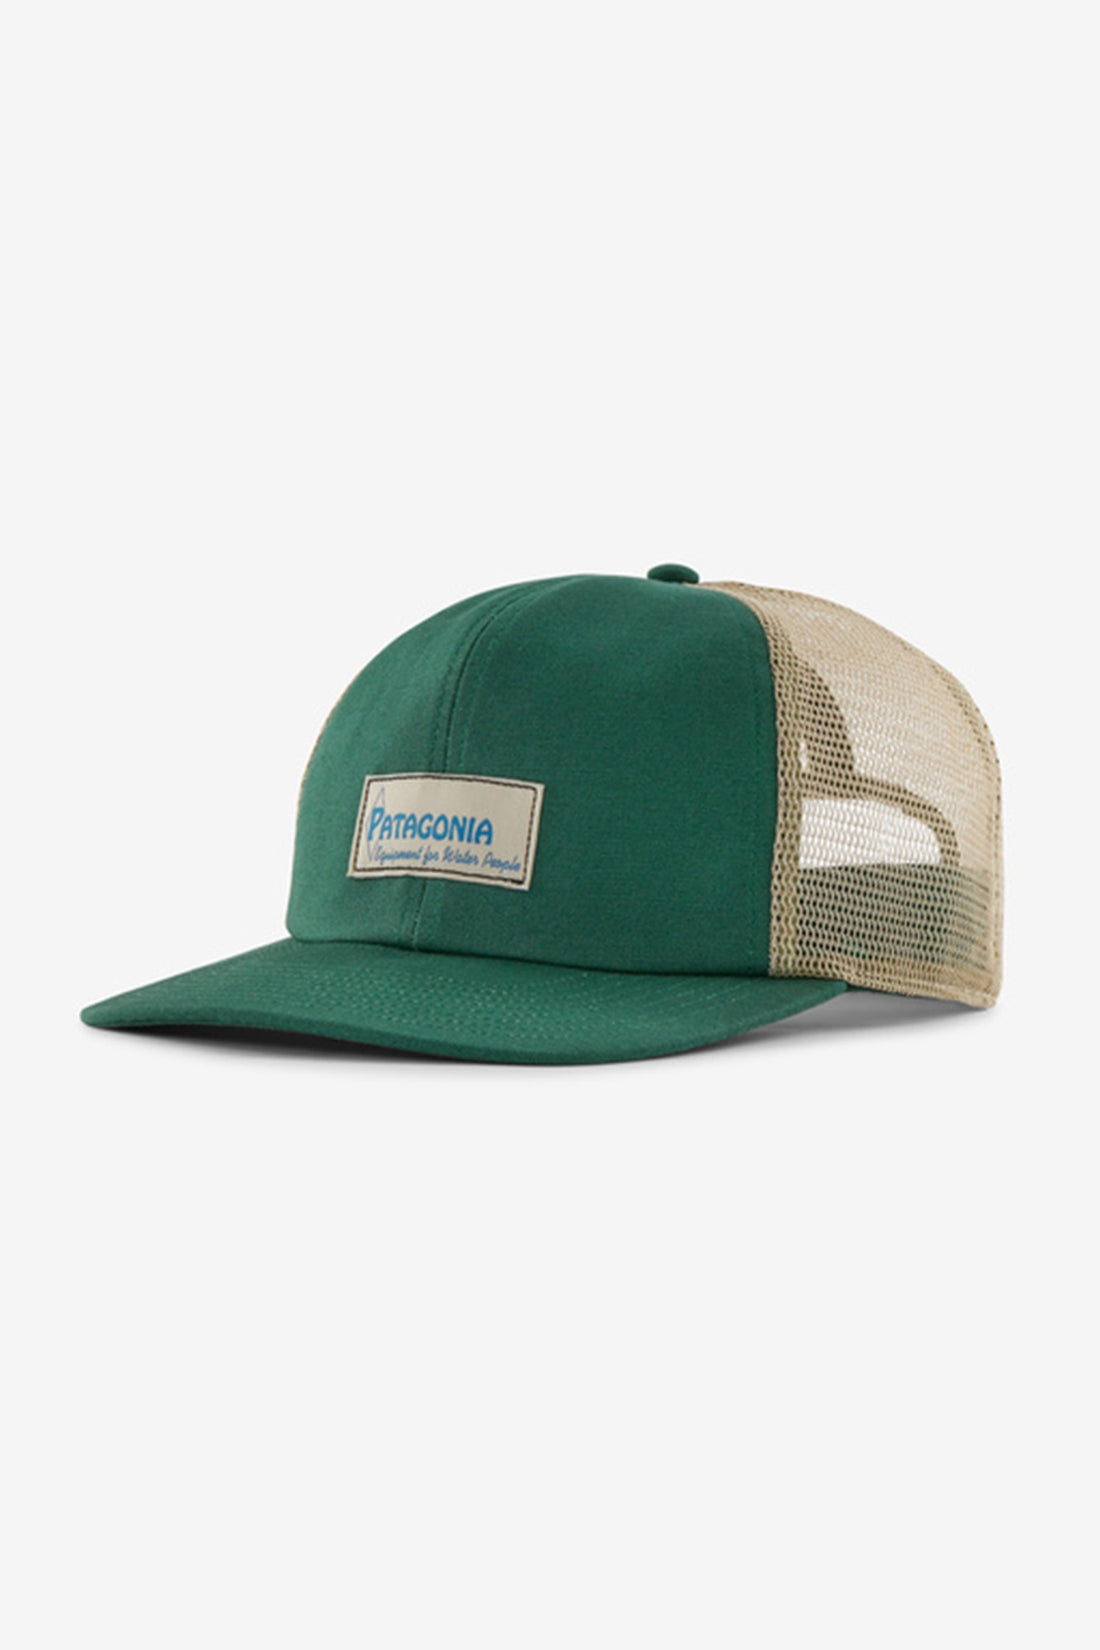 PATAGONIA RELAXED TRUCKER HAT - WATER PEOPLE LABEL: CONIFER GREEN – OAK  CLOTHING CO. INC.